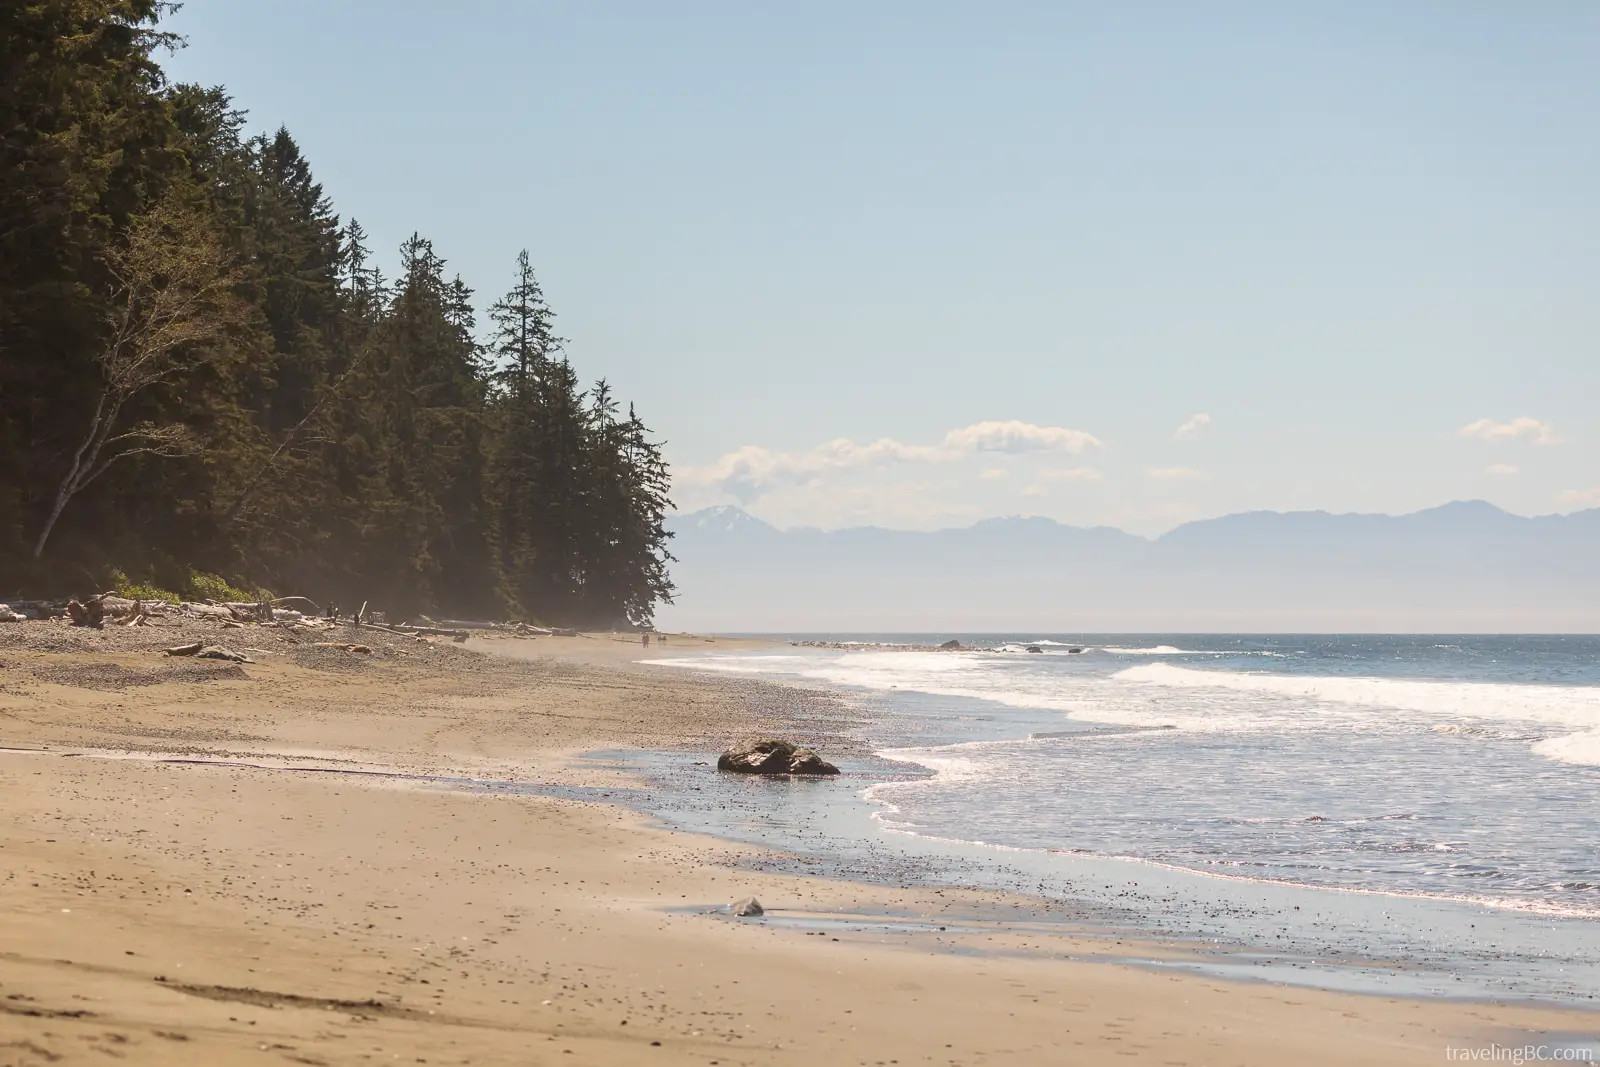 The long sandy beach at China Beach on Vancouver Island, with the mountains in the background